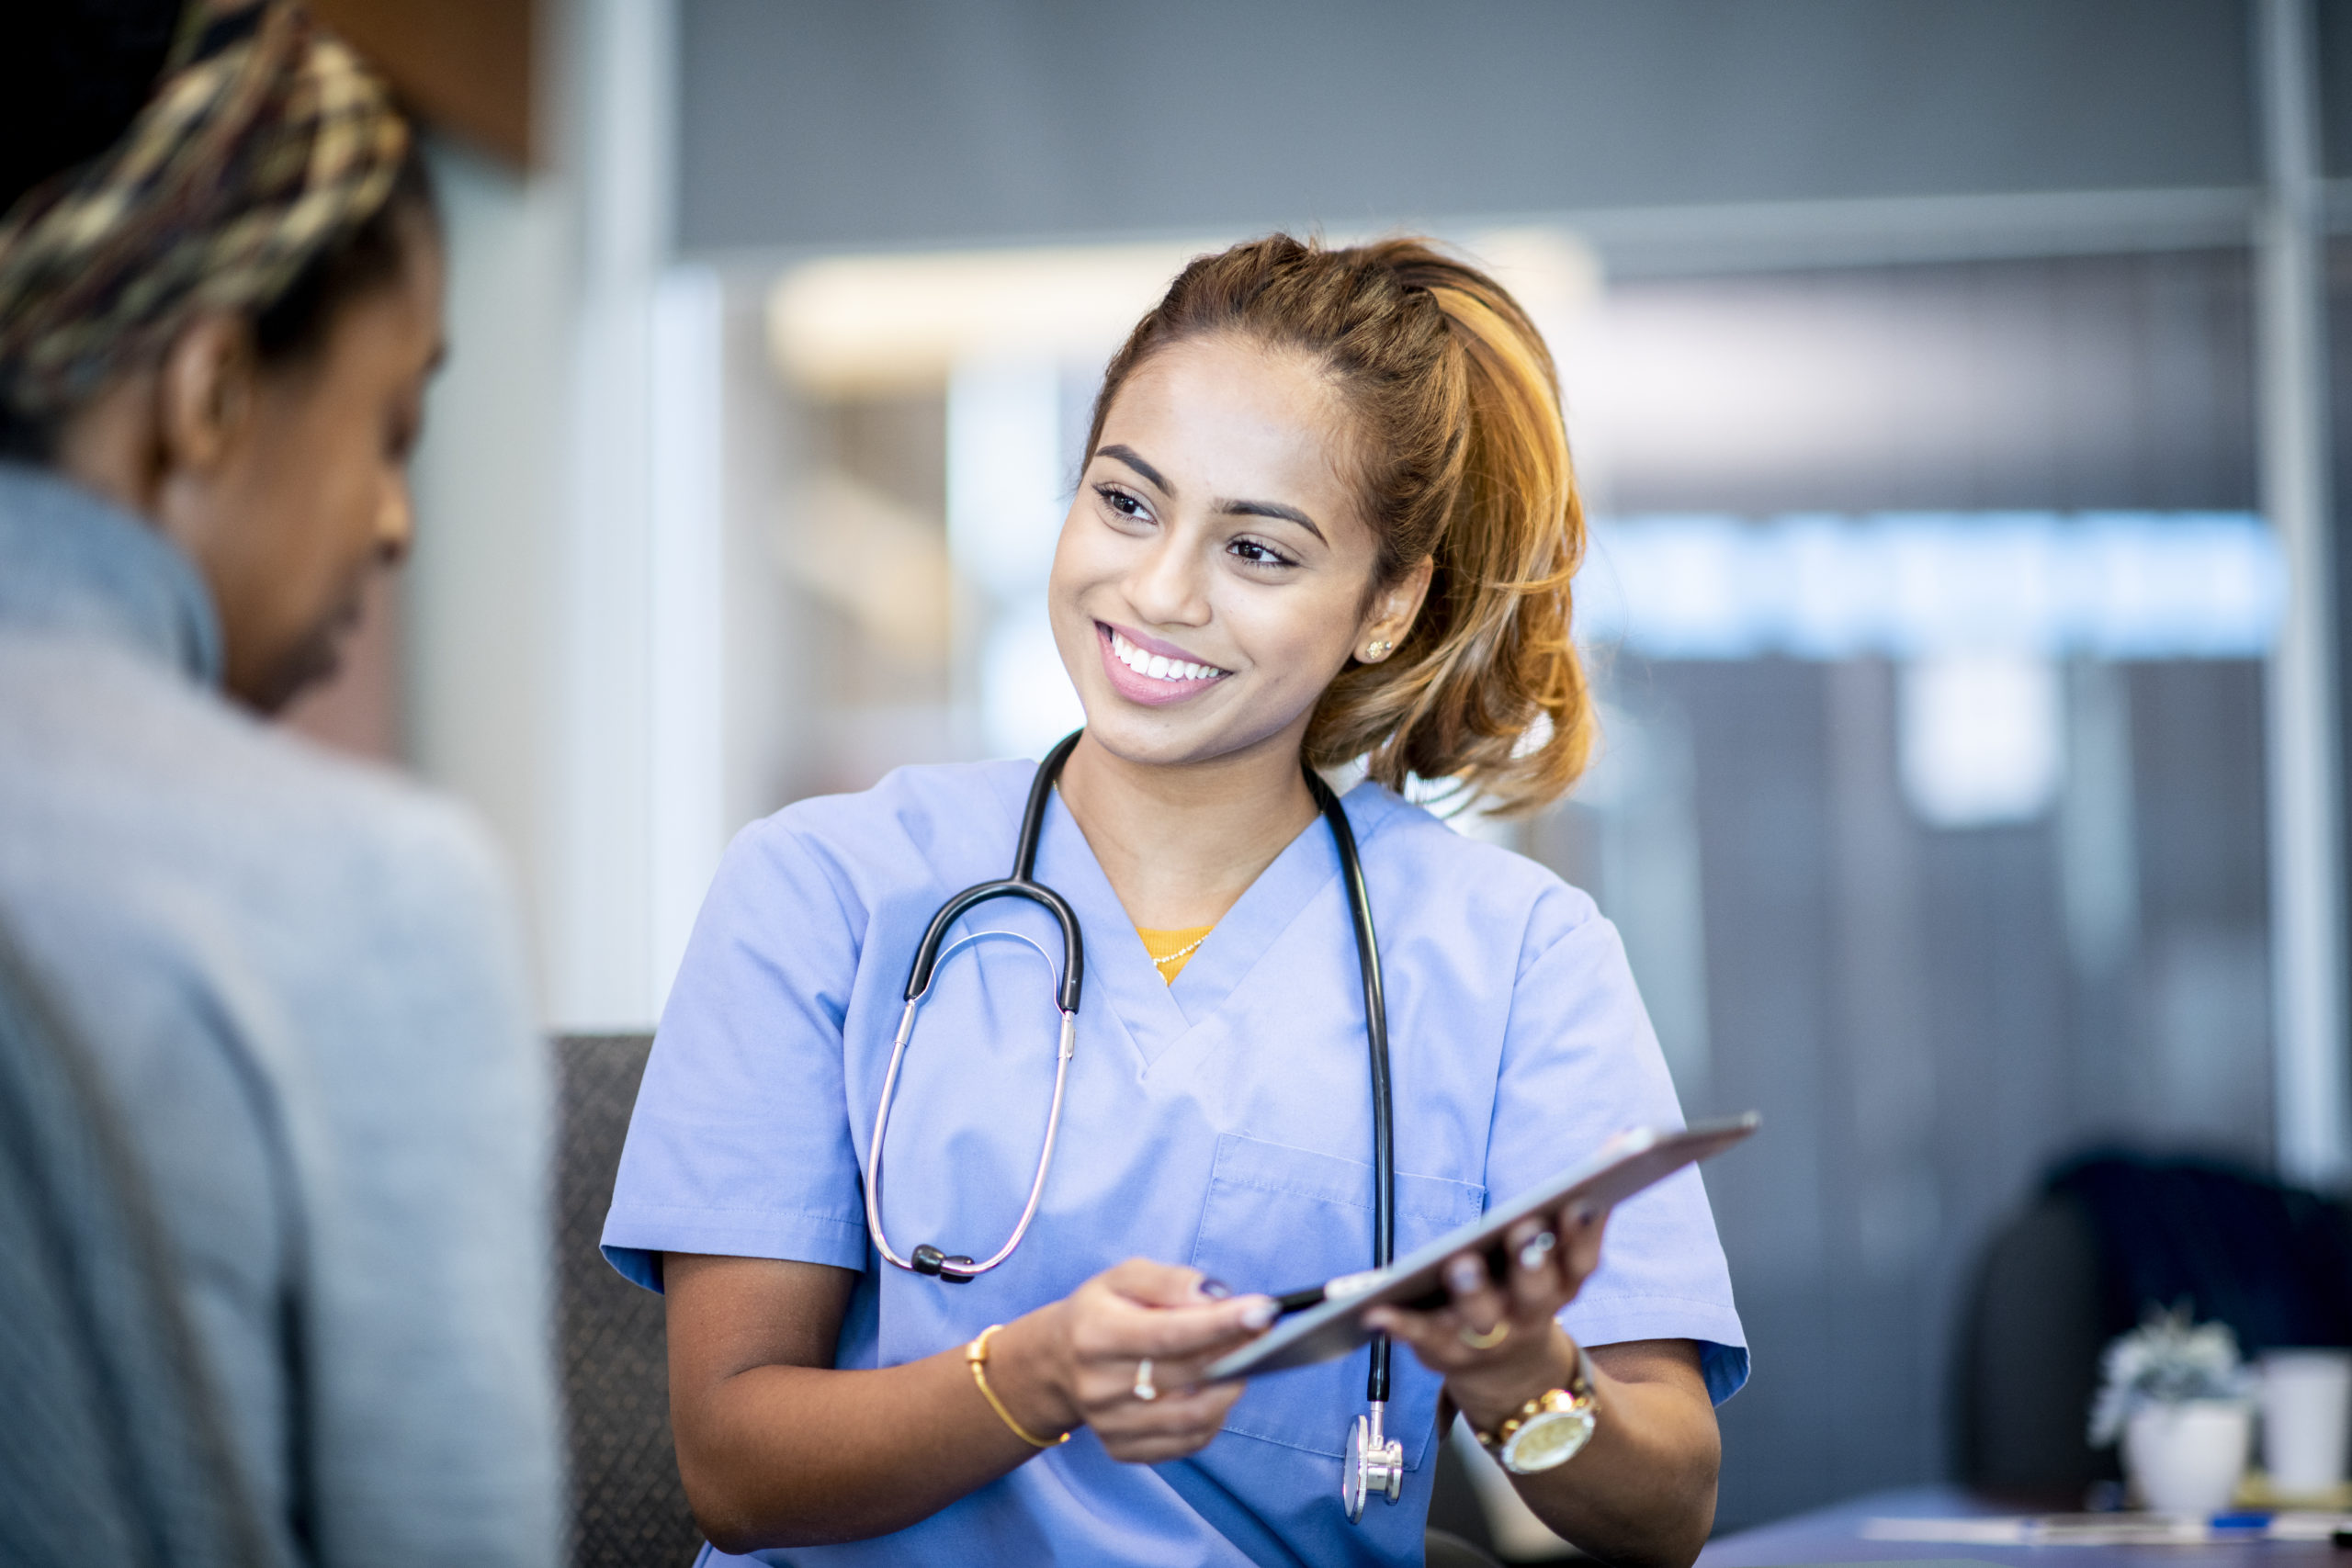 Breaking down barriers in healthcare with Connecting Care